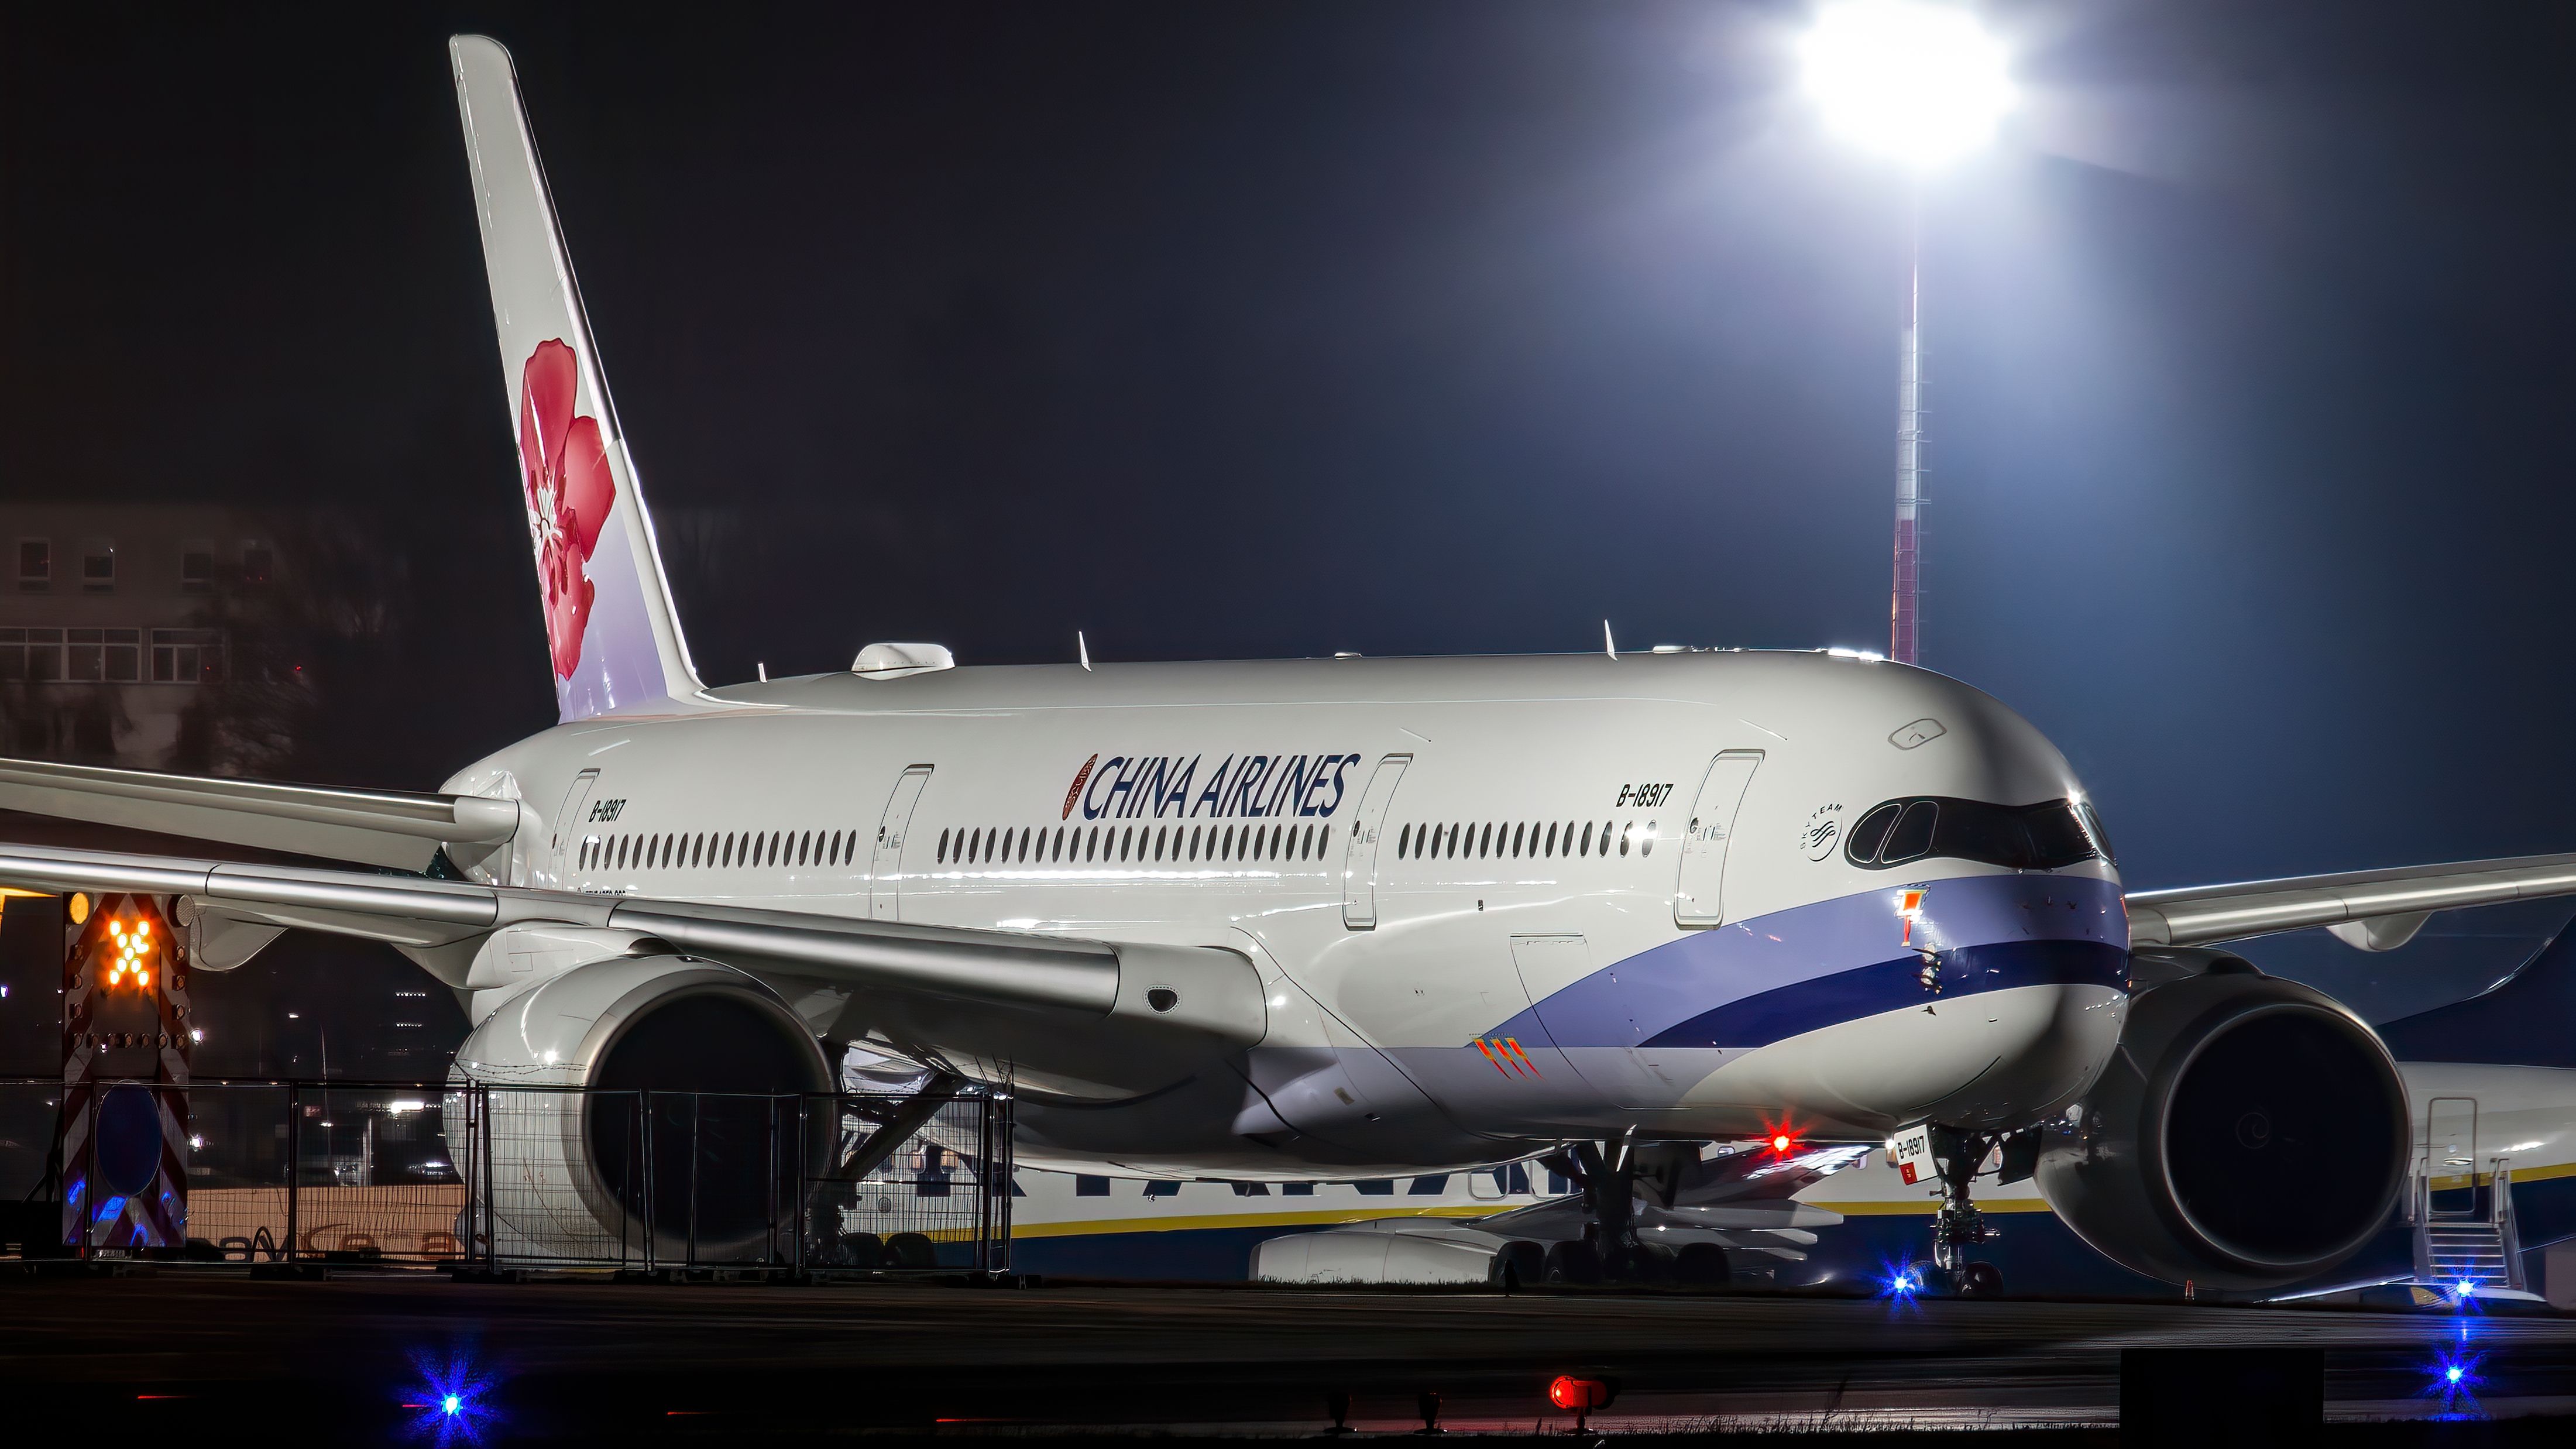 China Airlines Airbus A350 On The Ground At Night